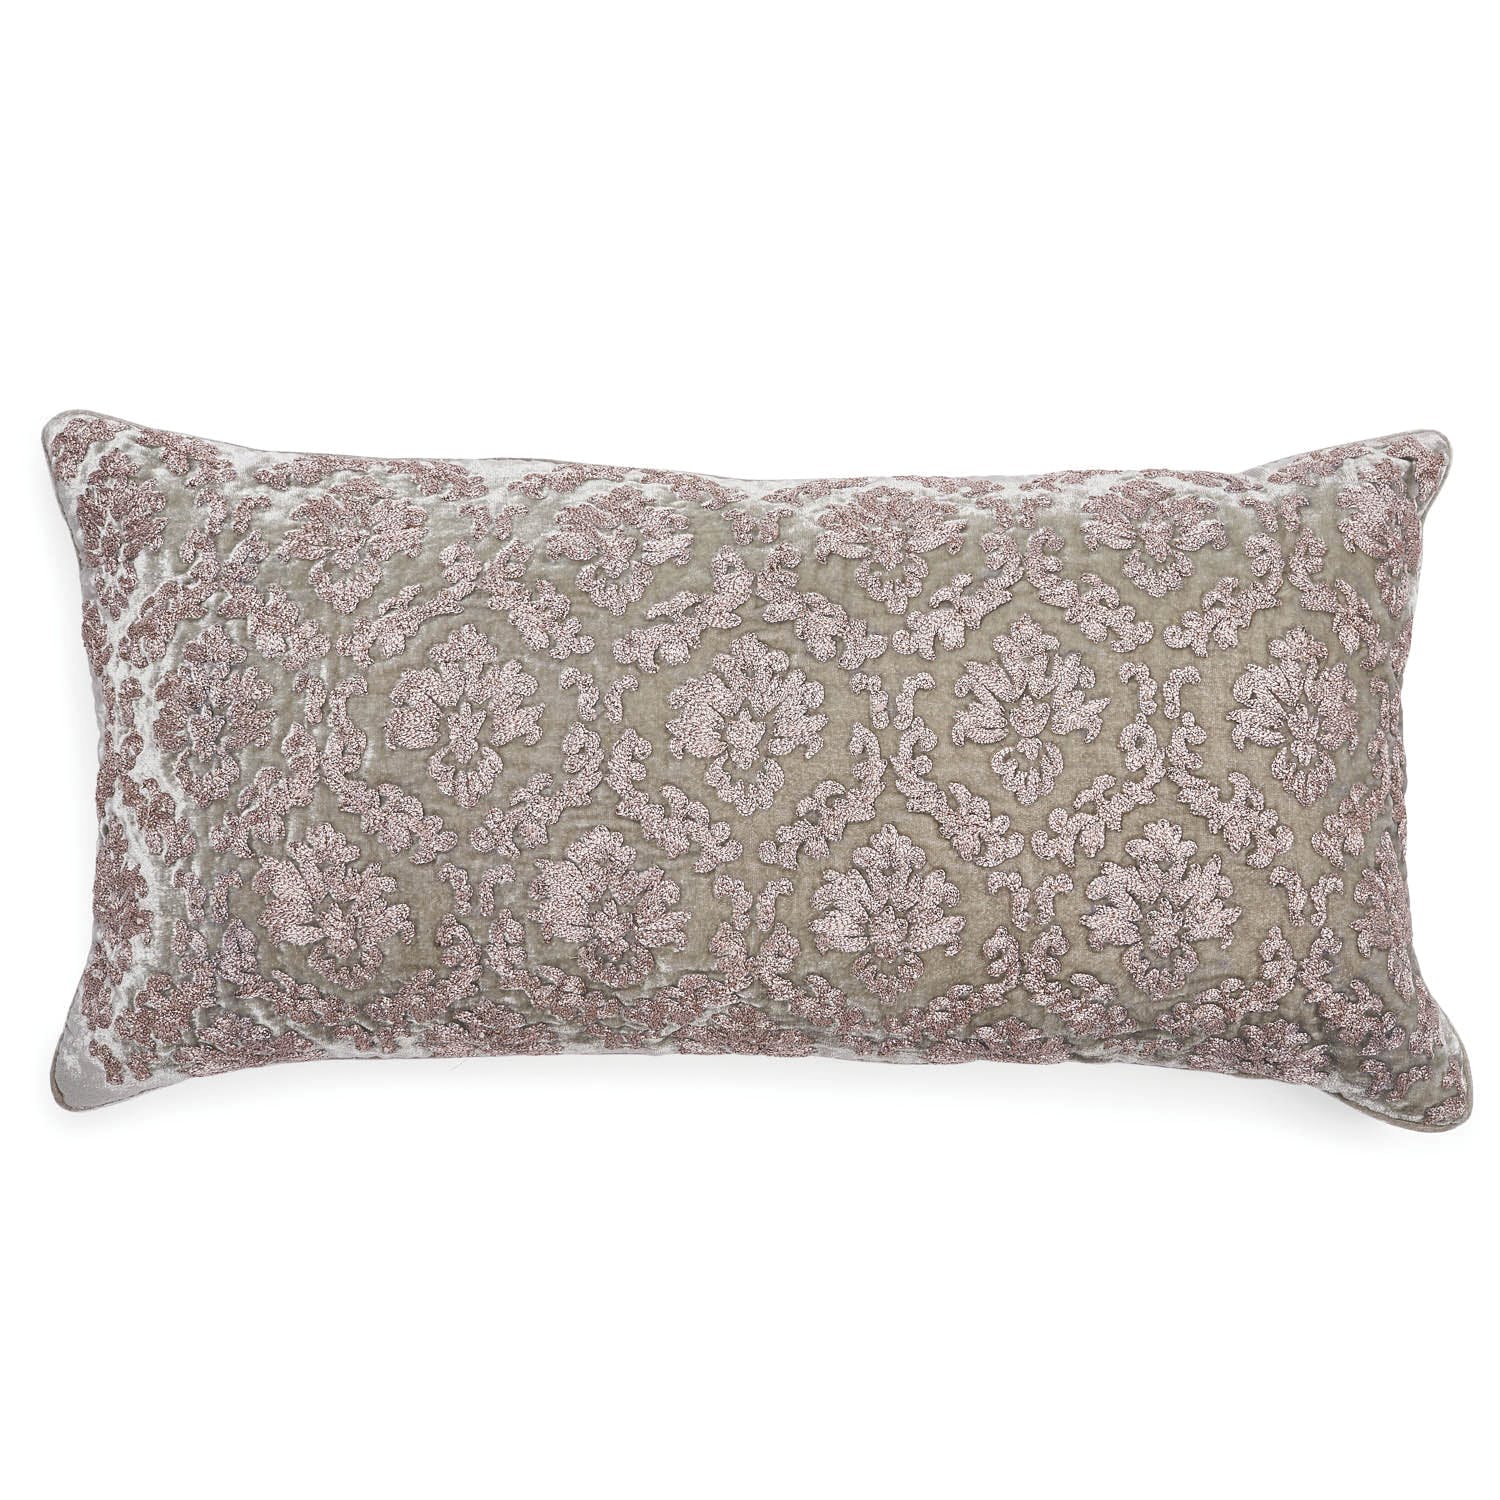 Rectangular decorative pillow with intricate floral lace pattern in dusty rose and taupe.